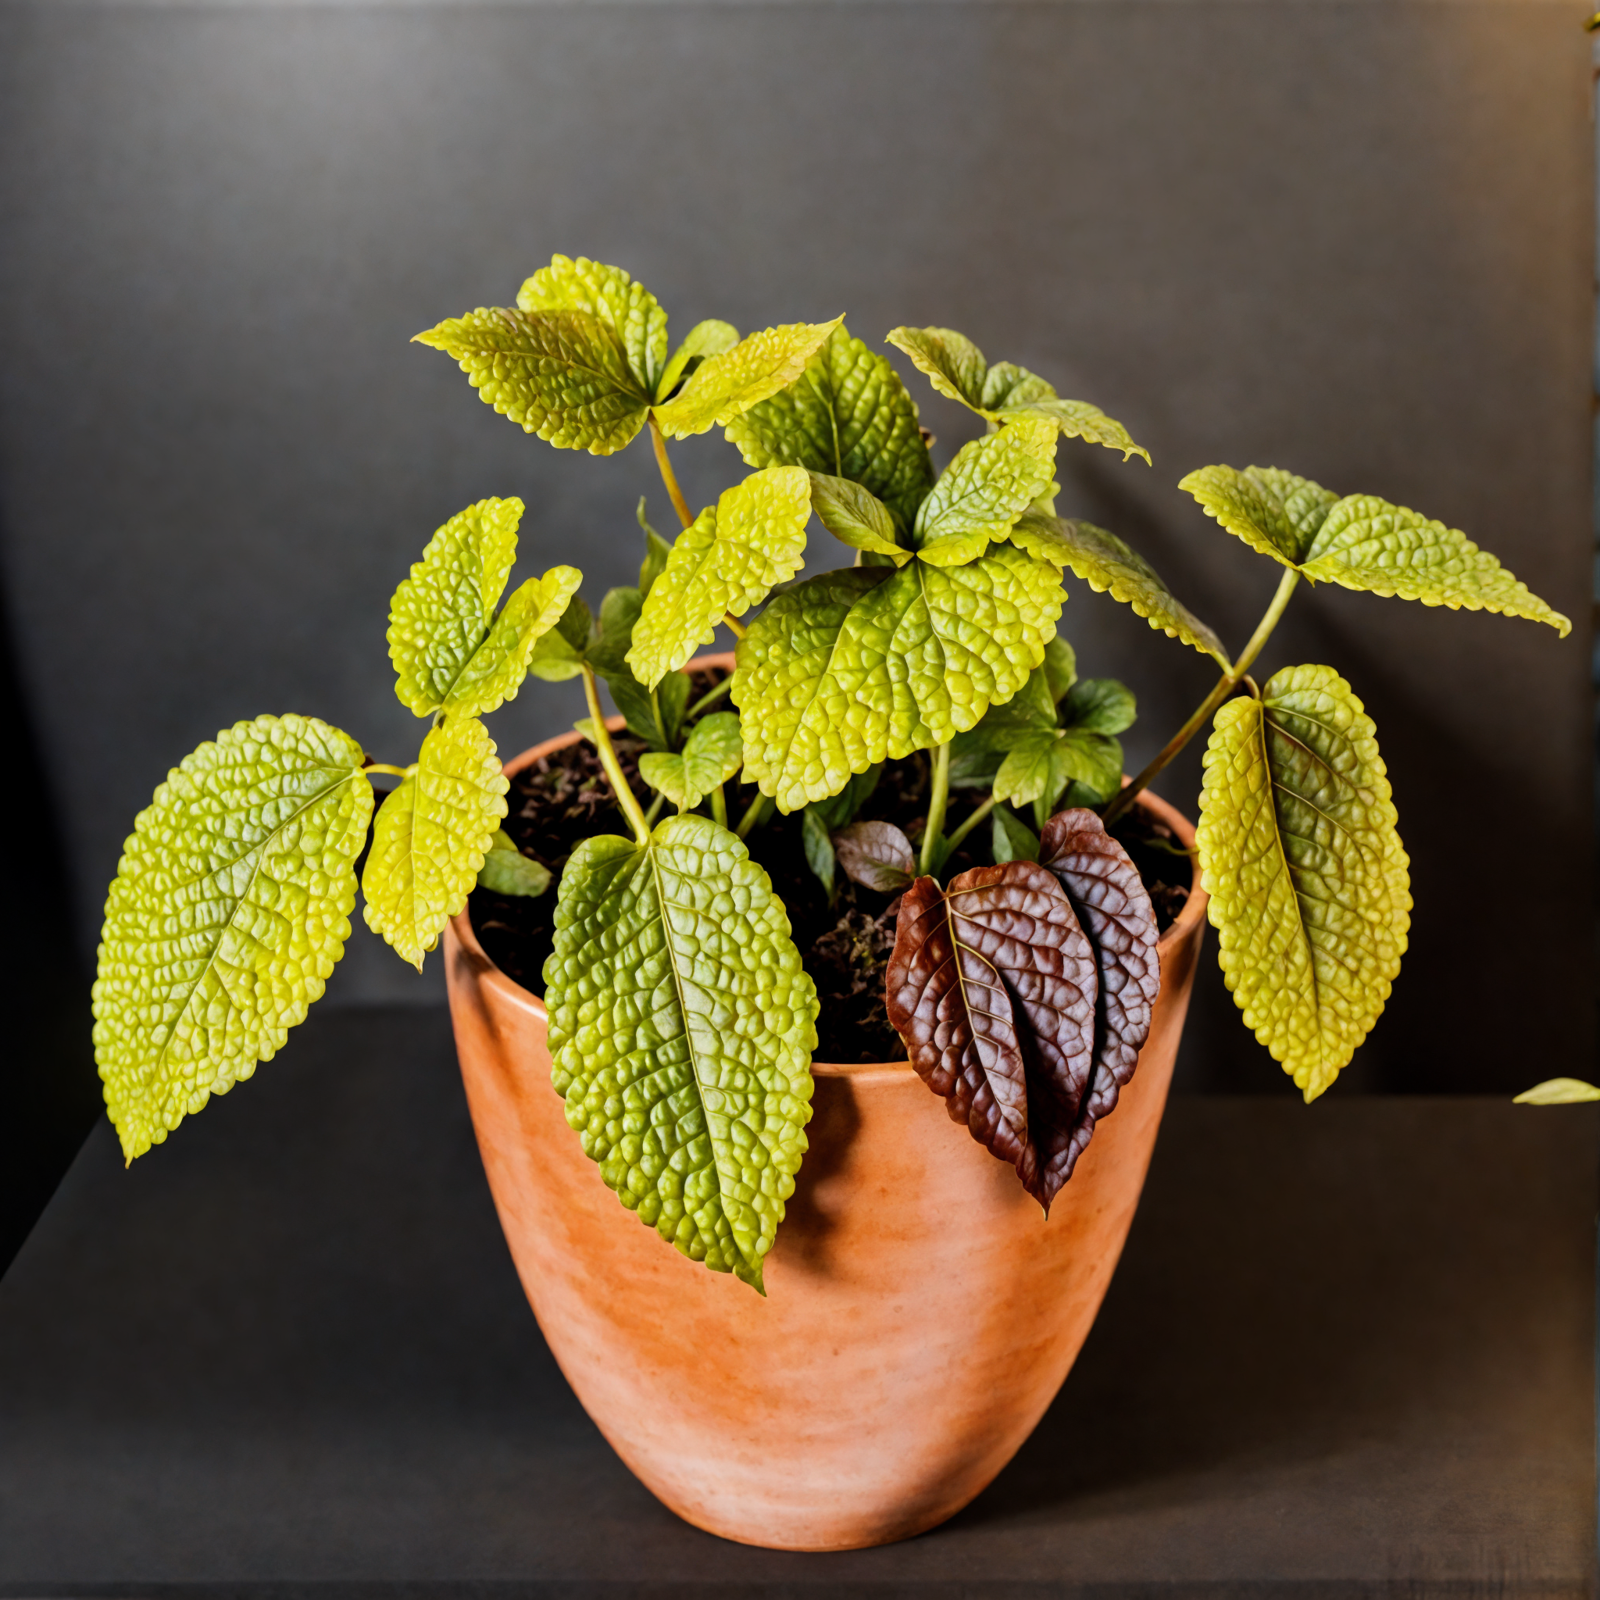 Pilea involucrata in a brown vase with two other plants on a table, clear lighting, dark background.